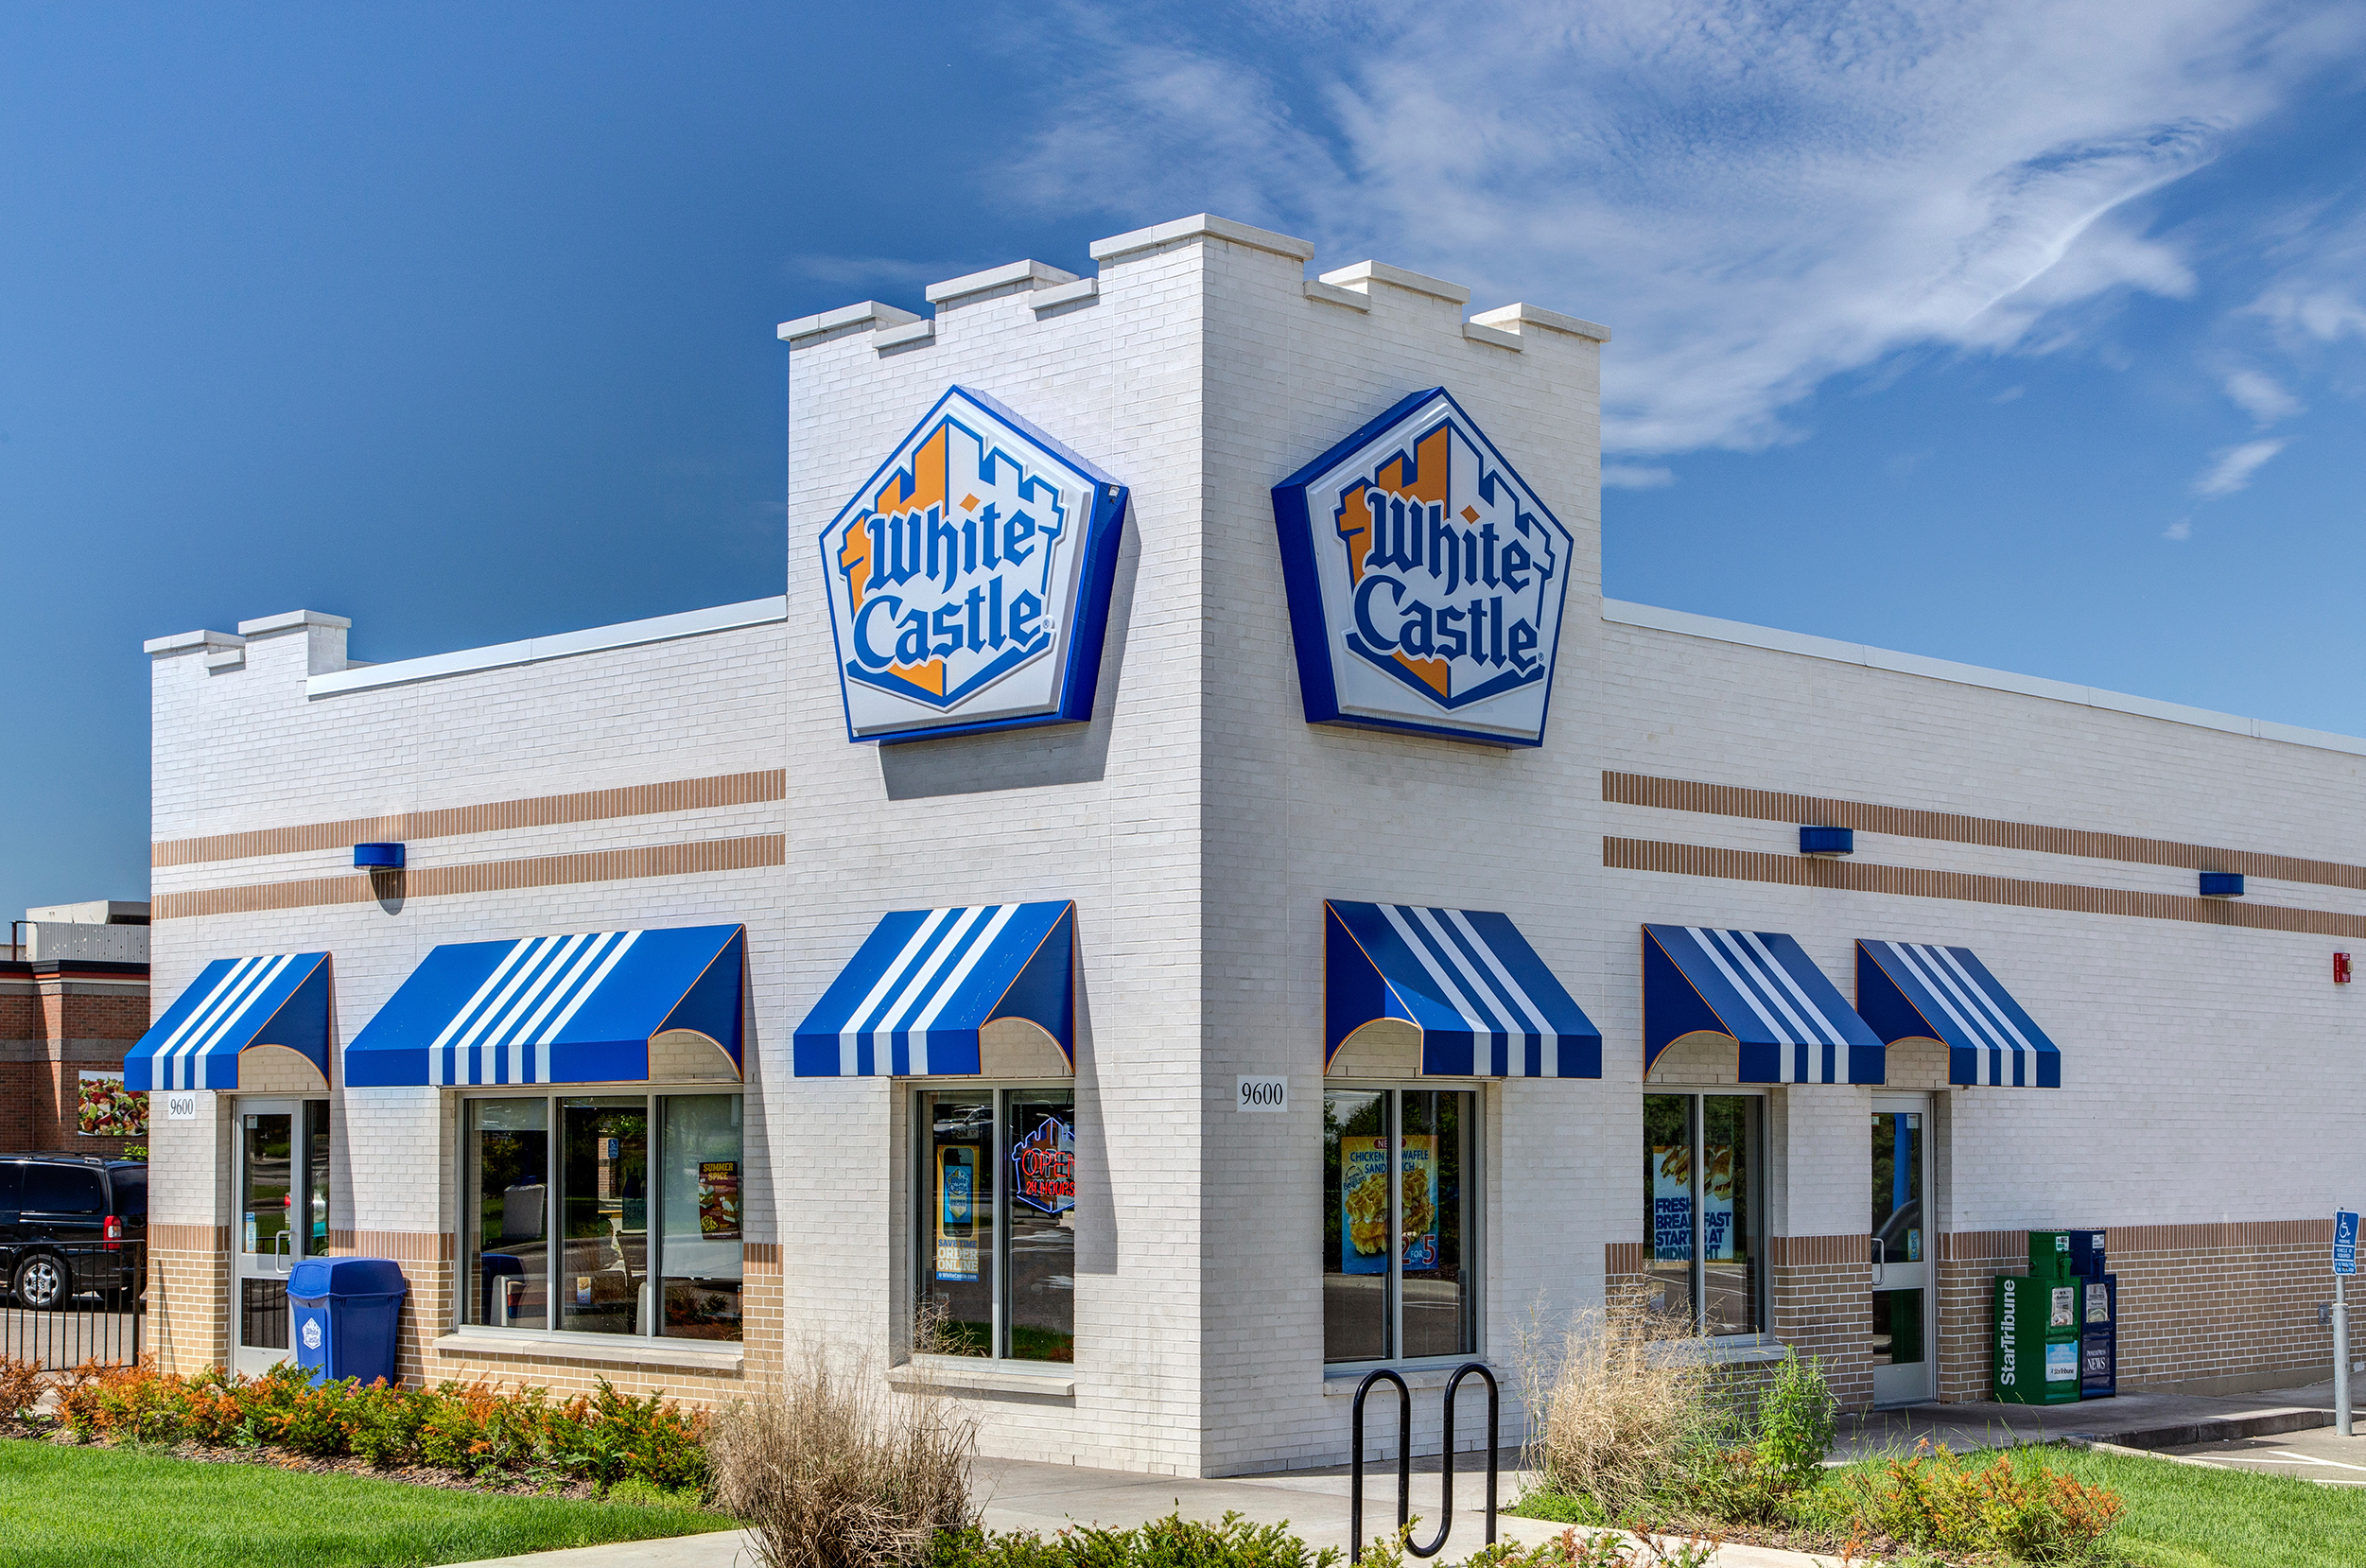 White Castle menu prices featuring 112 items ranging from $0.39 to $17.99